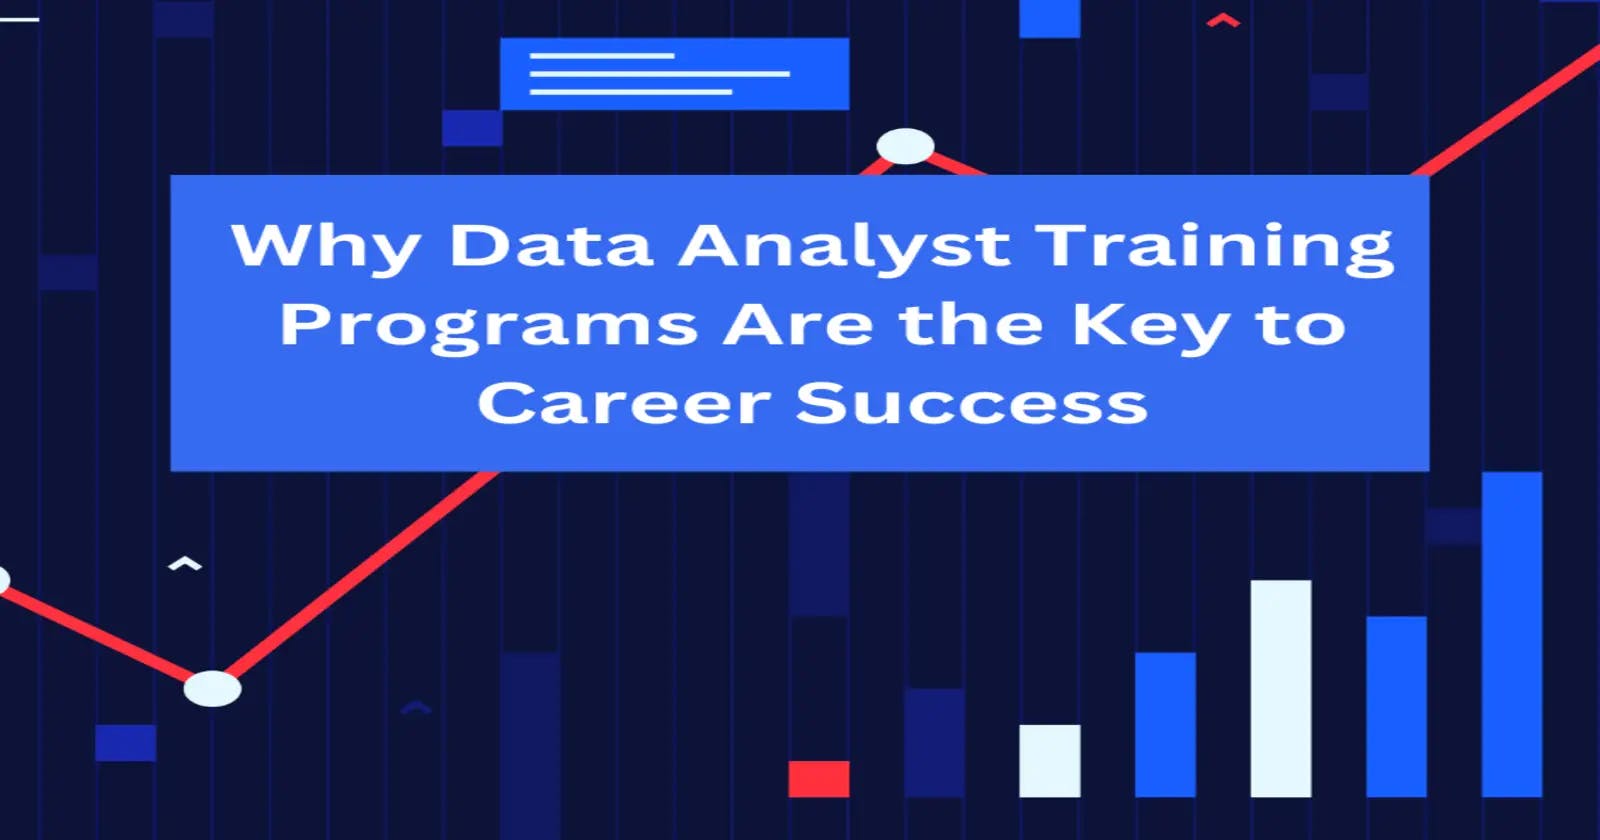 Why Data Analyst Training Programs Are the Key to Career Success